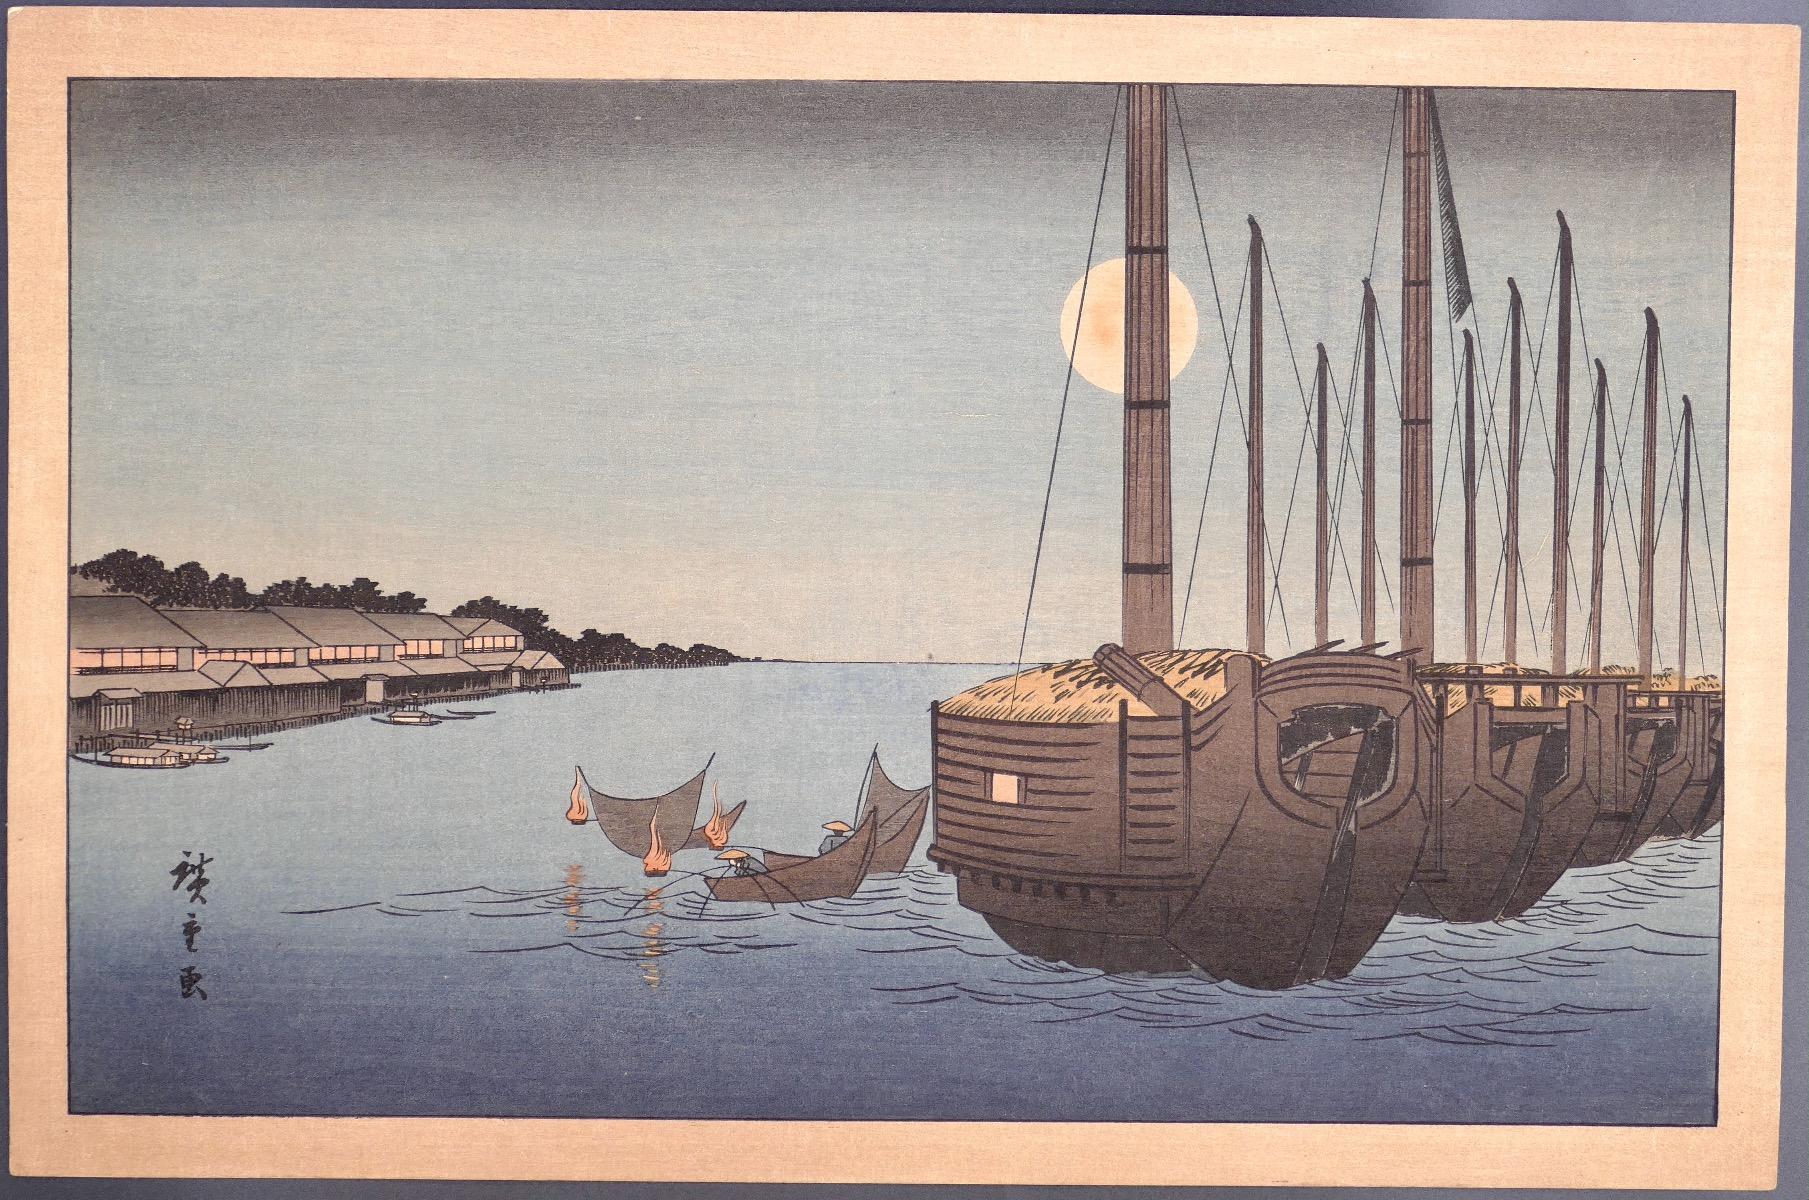 Night Fishing is an original Woodcut Print realized after an earlier print by Utagawa Hiroshige between 1900 And 1940. 

Excellent condition.

Utagawa Hiroshige, also known as Hiroshige (Edo, 1797-1858)
When it comes to ukiyo-e artists there are not